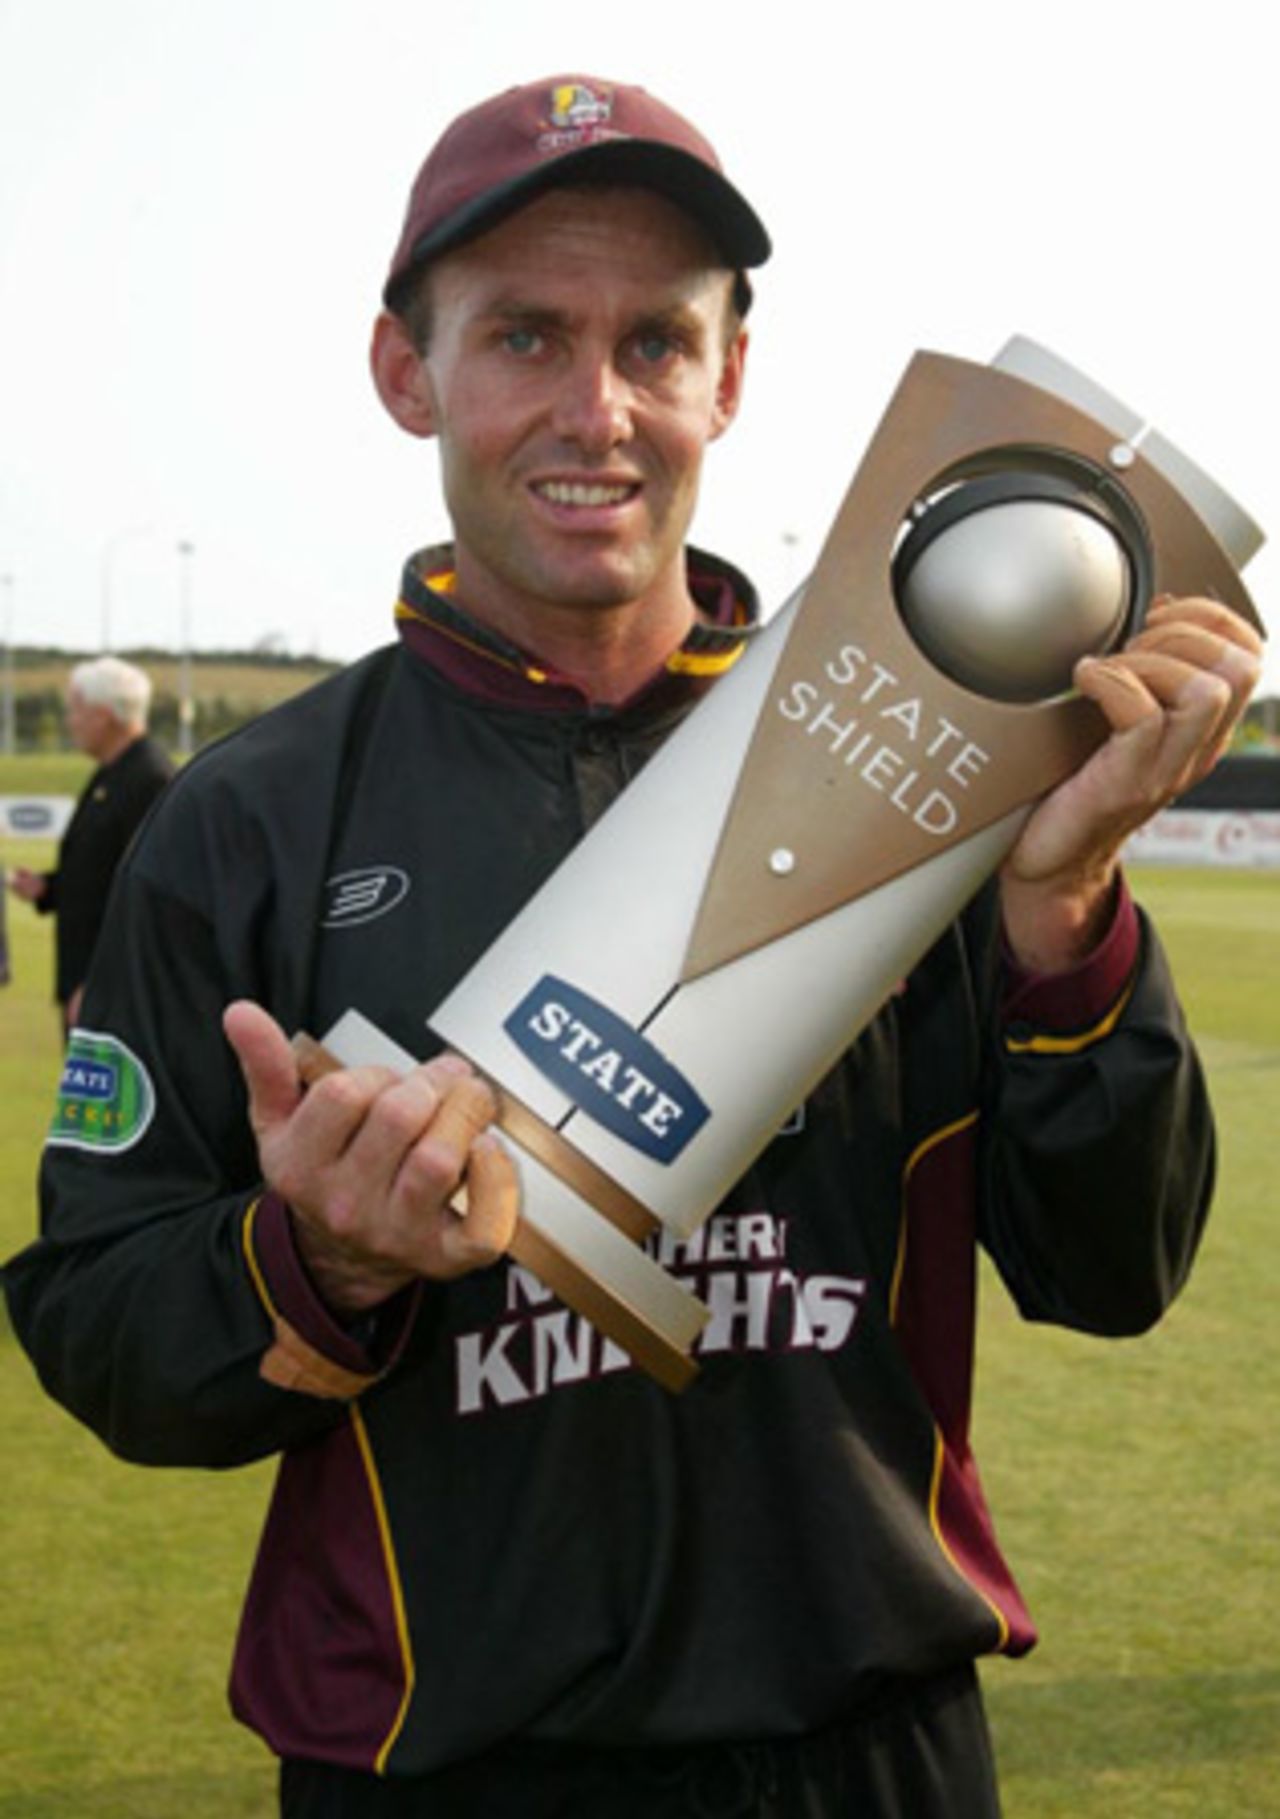 Northern Districts captain Robbie Hart holds the State Shield trophy. Northern Districts beat Auckland by 17 runs in the 2002/03 final. State Shield Final: Auckland v Northern Districts at North Harbour Stadium, Auckland, 1 February 2003.